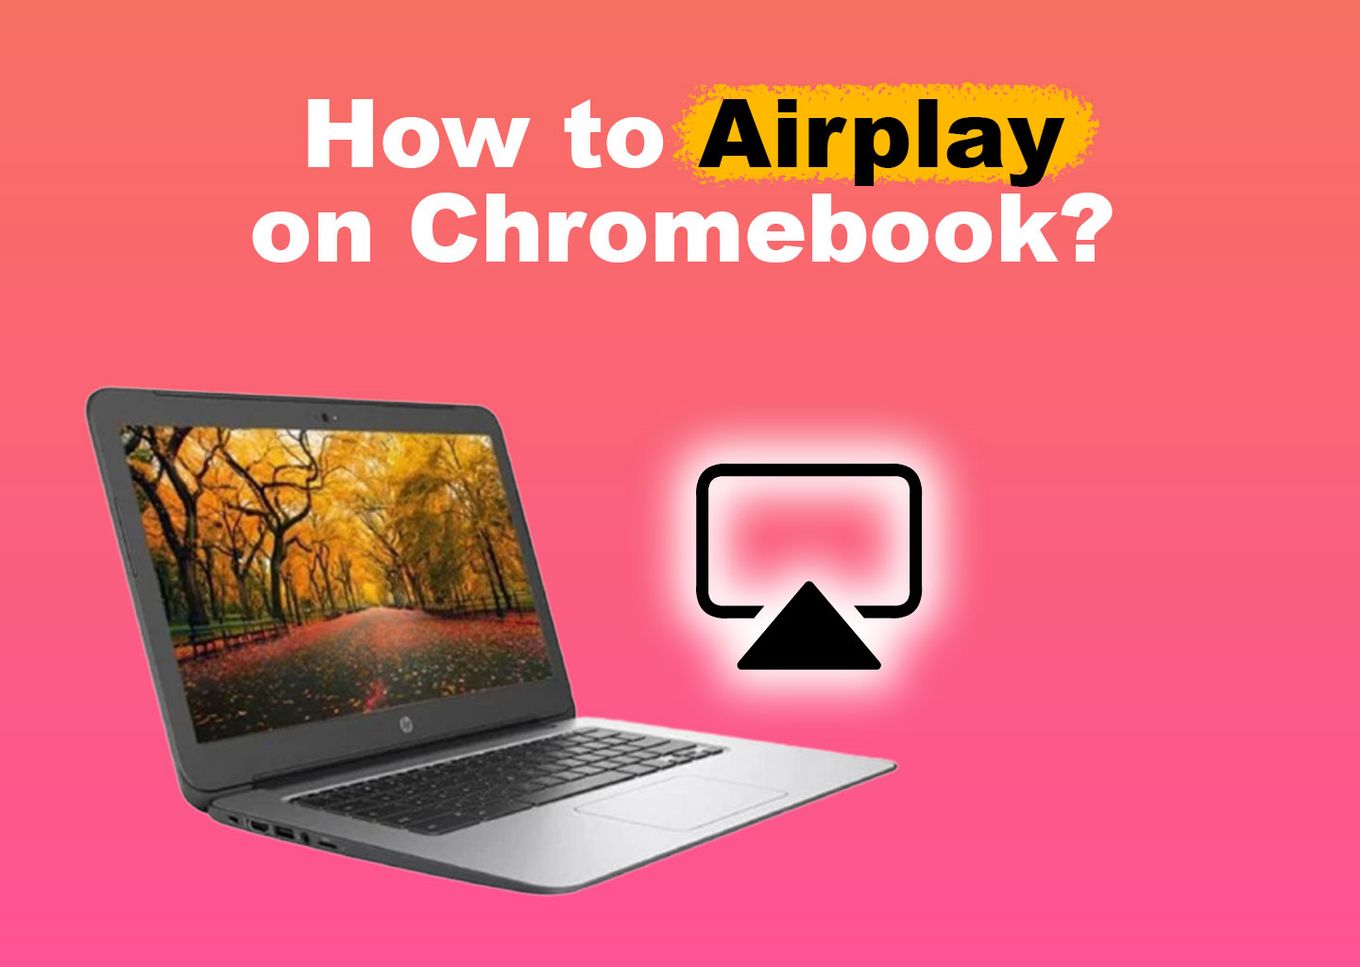 How to Airplay on Chromebook